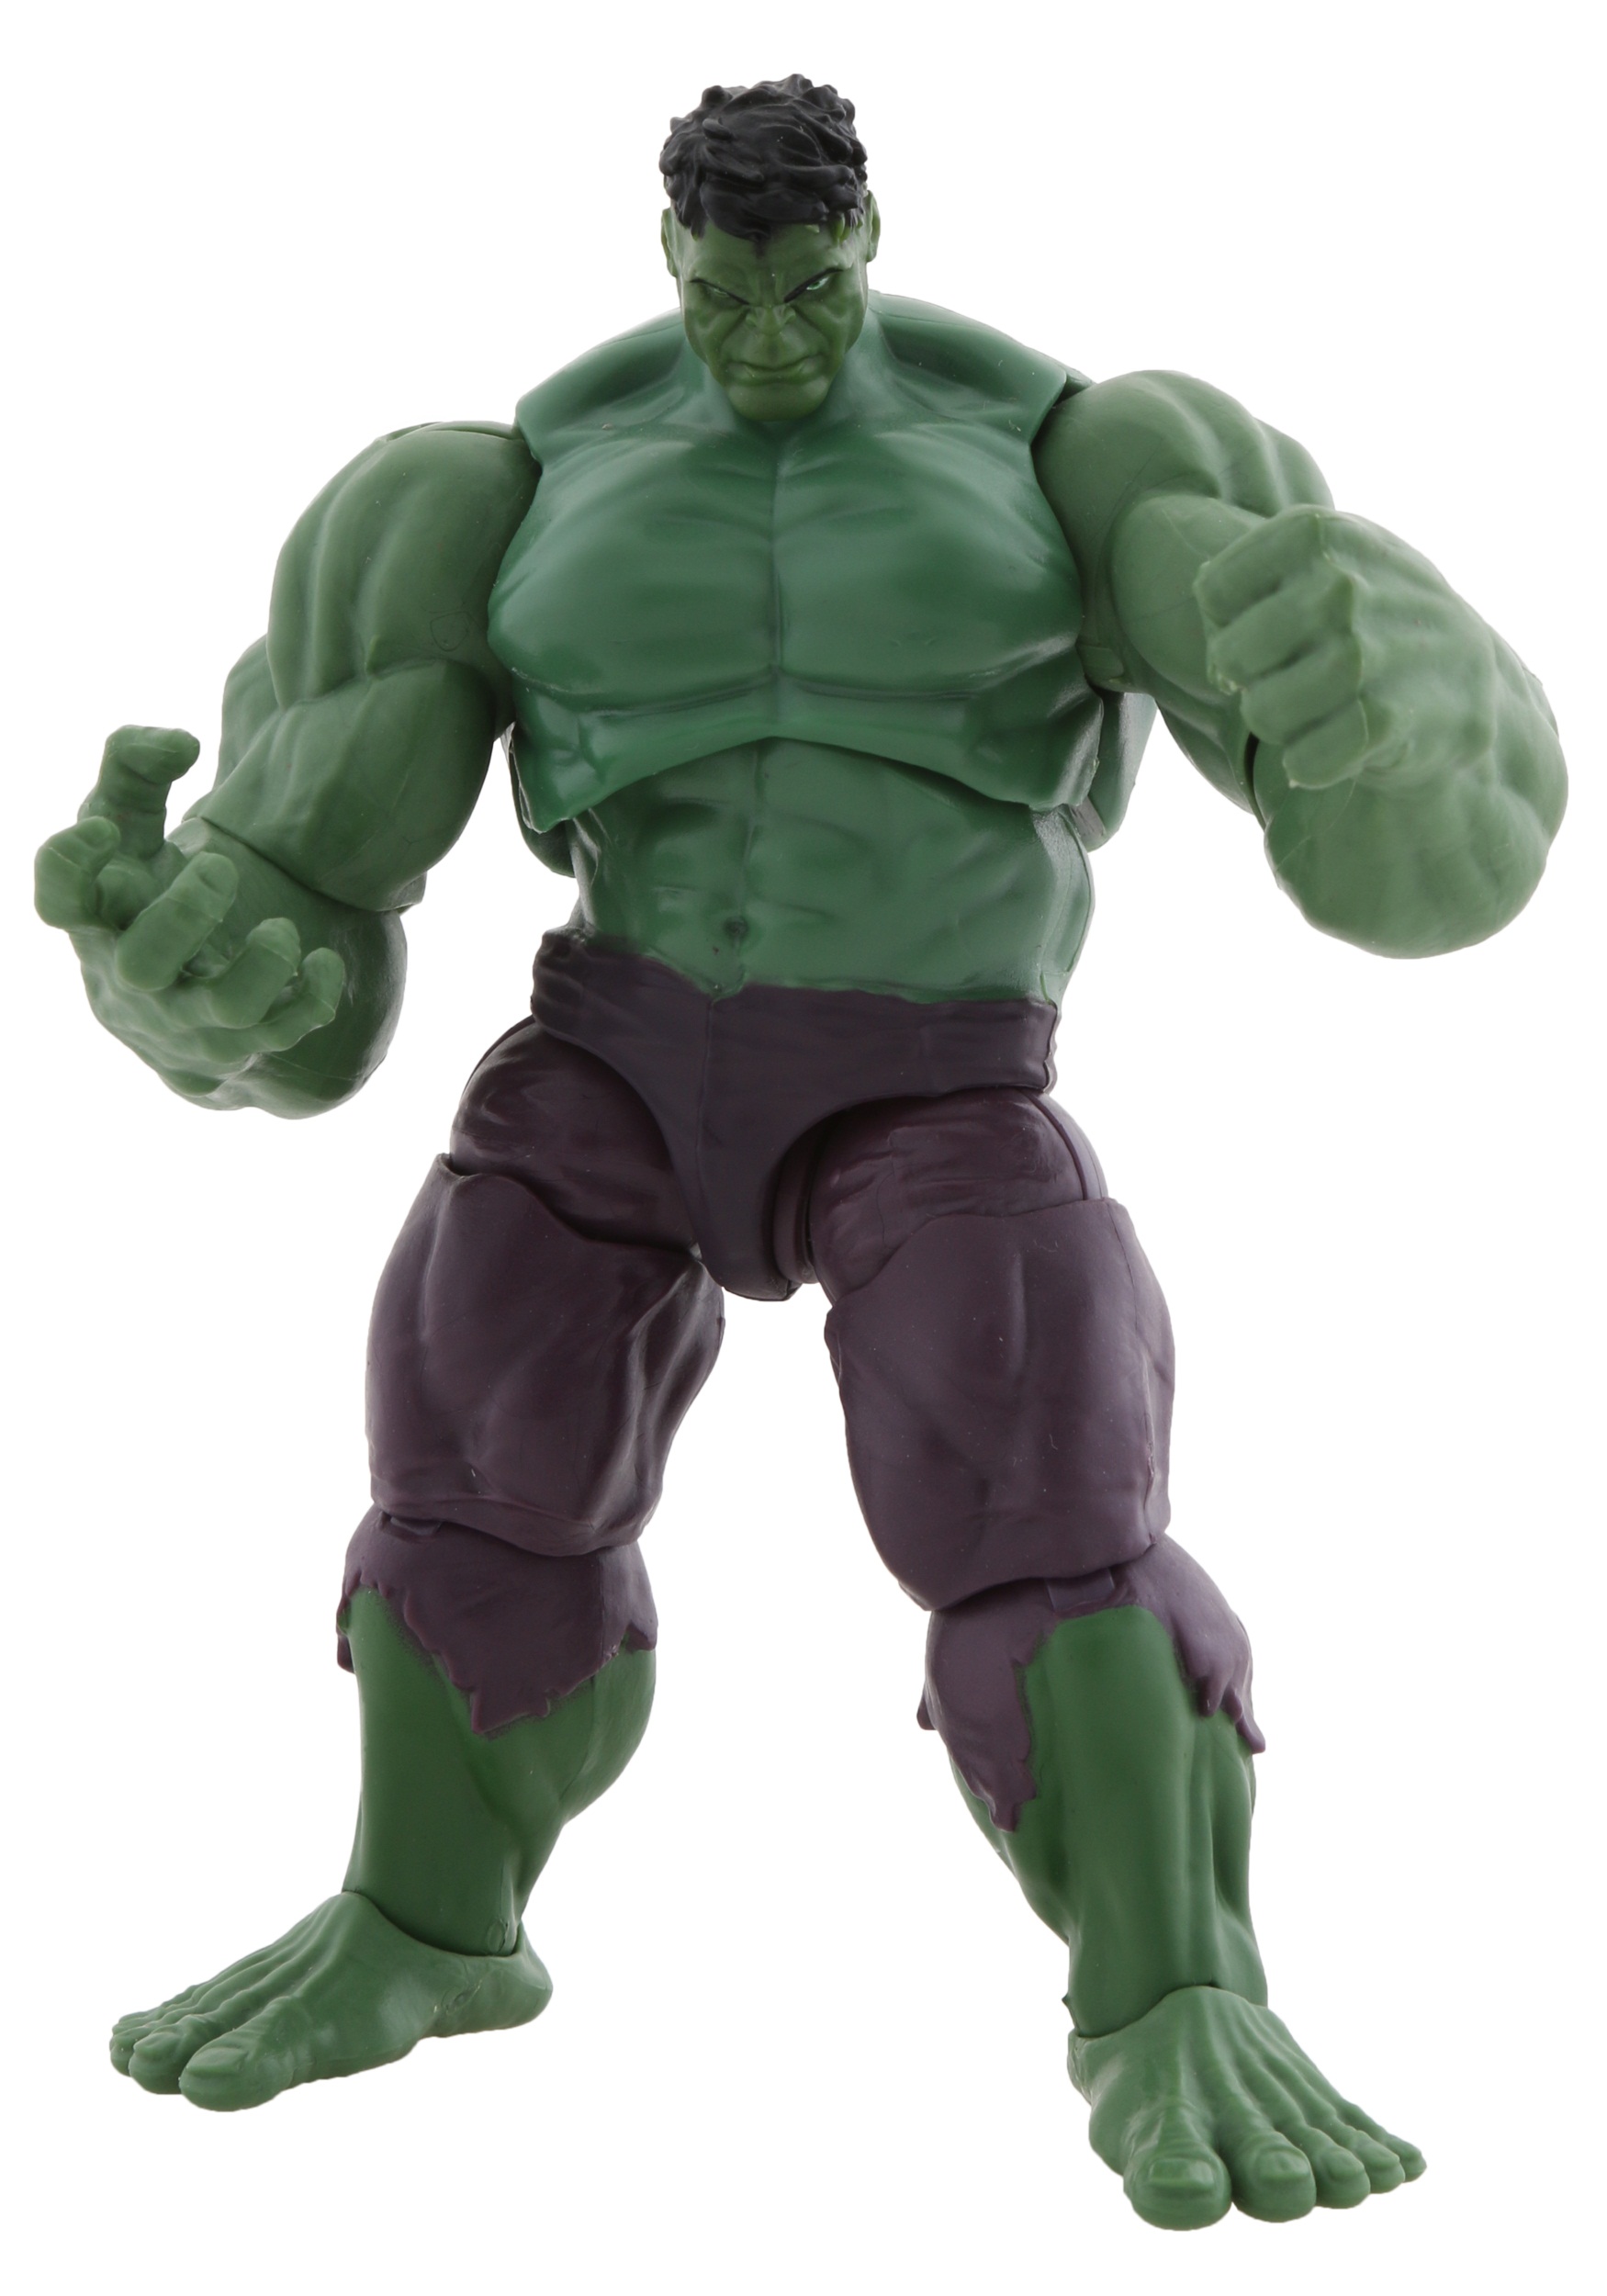 Marvel Select Avengers Age of Ultron Hulk Figure Review 